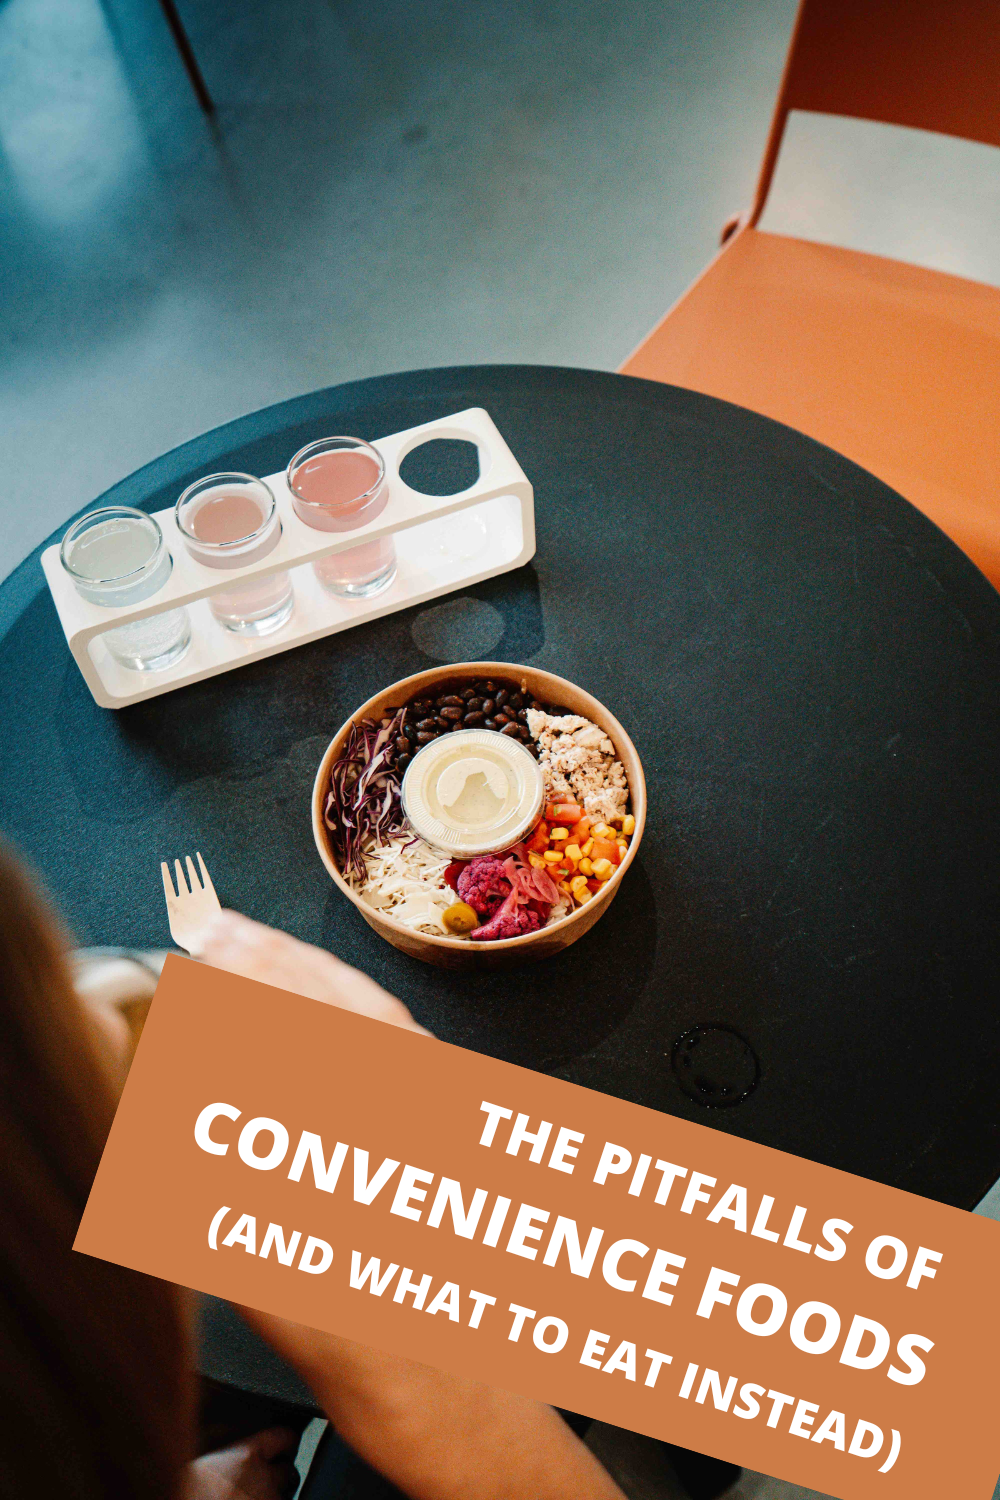 The pitfalls of convenience foods (and what to eat instead)